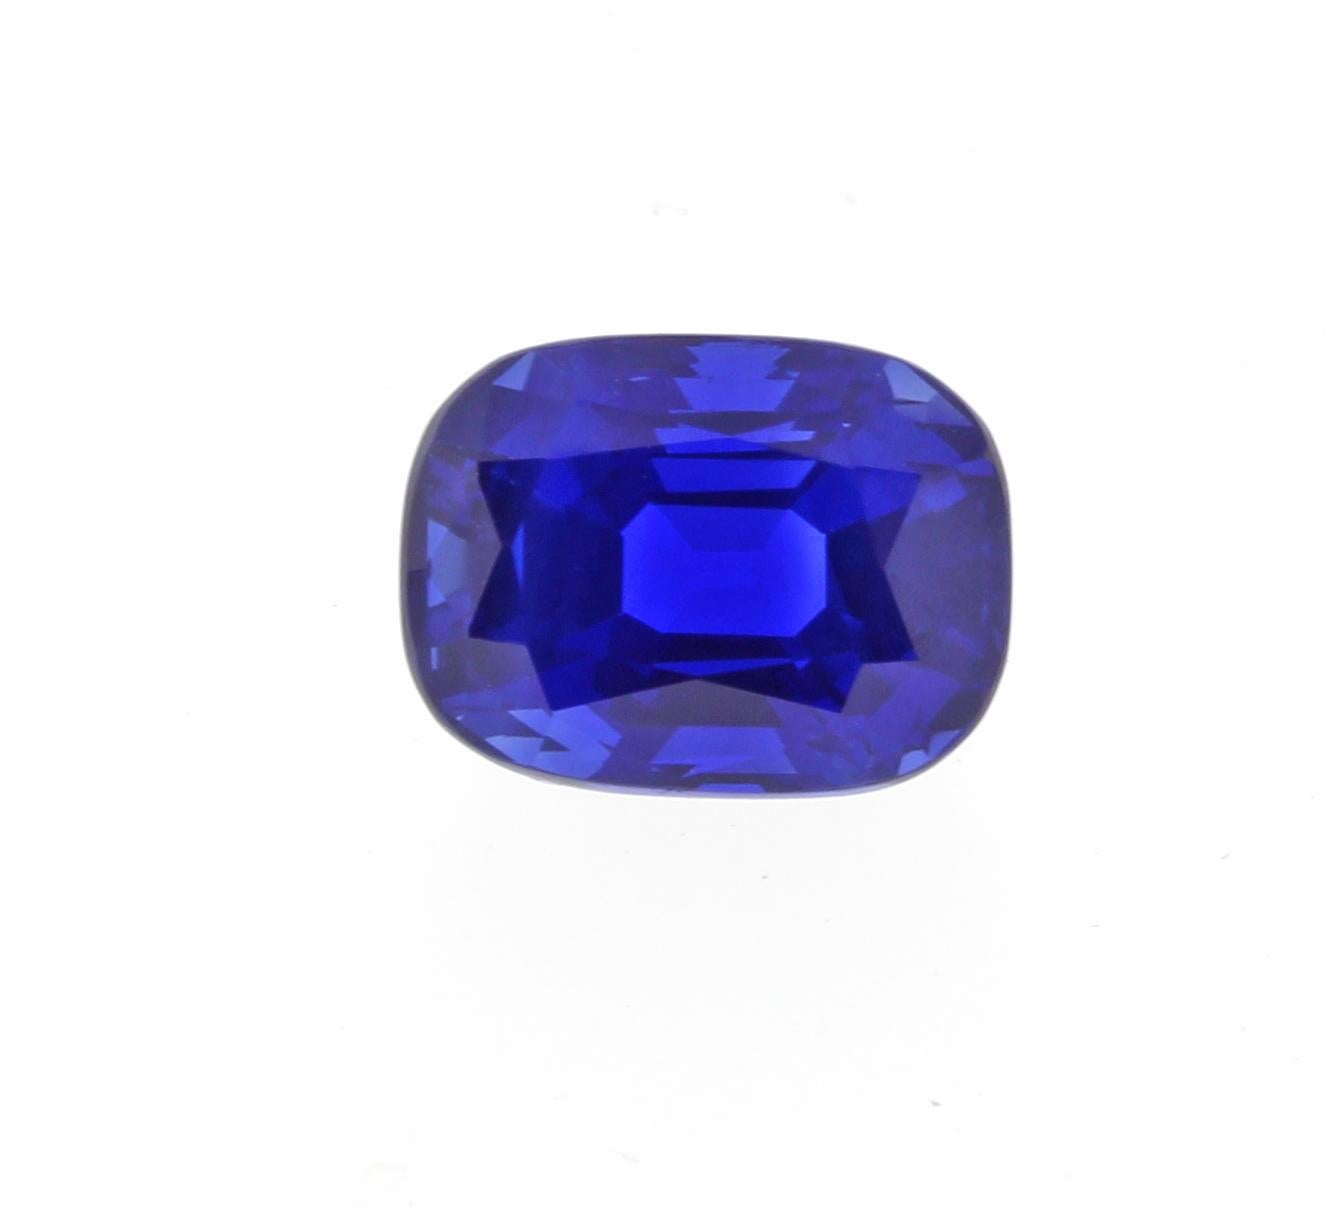 This rare 5.75 carat Kashmir sapphire is certified by both A.G.L and Gubelin to be of natural origin from Kashmir with no evidence of heat. The master ring makers of Pampillonia jewelers will be happy to work with you on a custom design for this